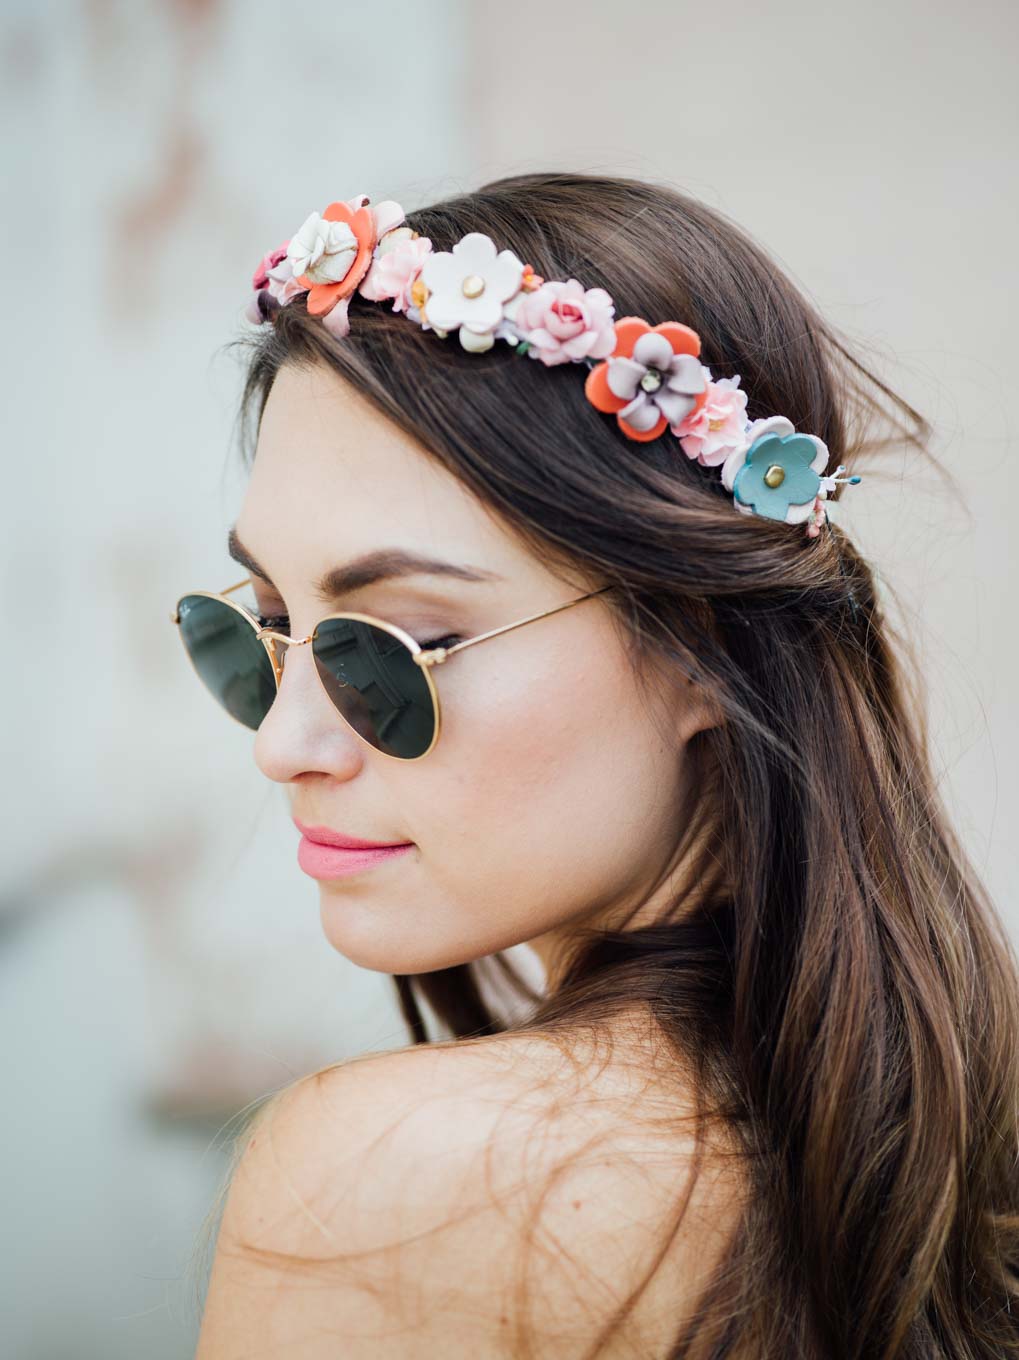 OUTFIT: Mayday - We Are Flowergirls x Marina Hoermanseder | #yourockmylife